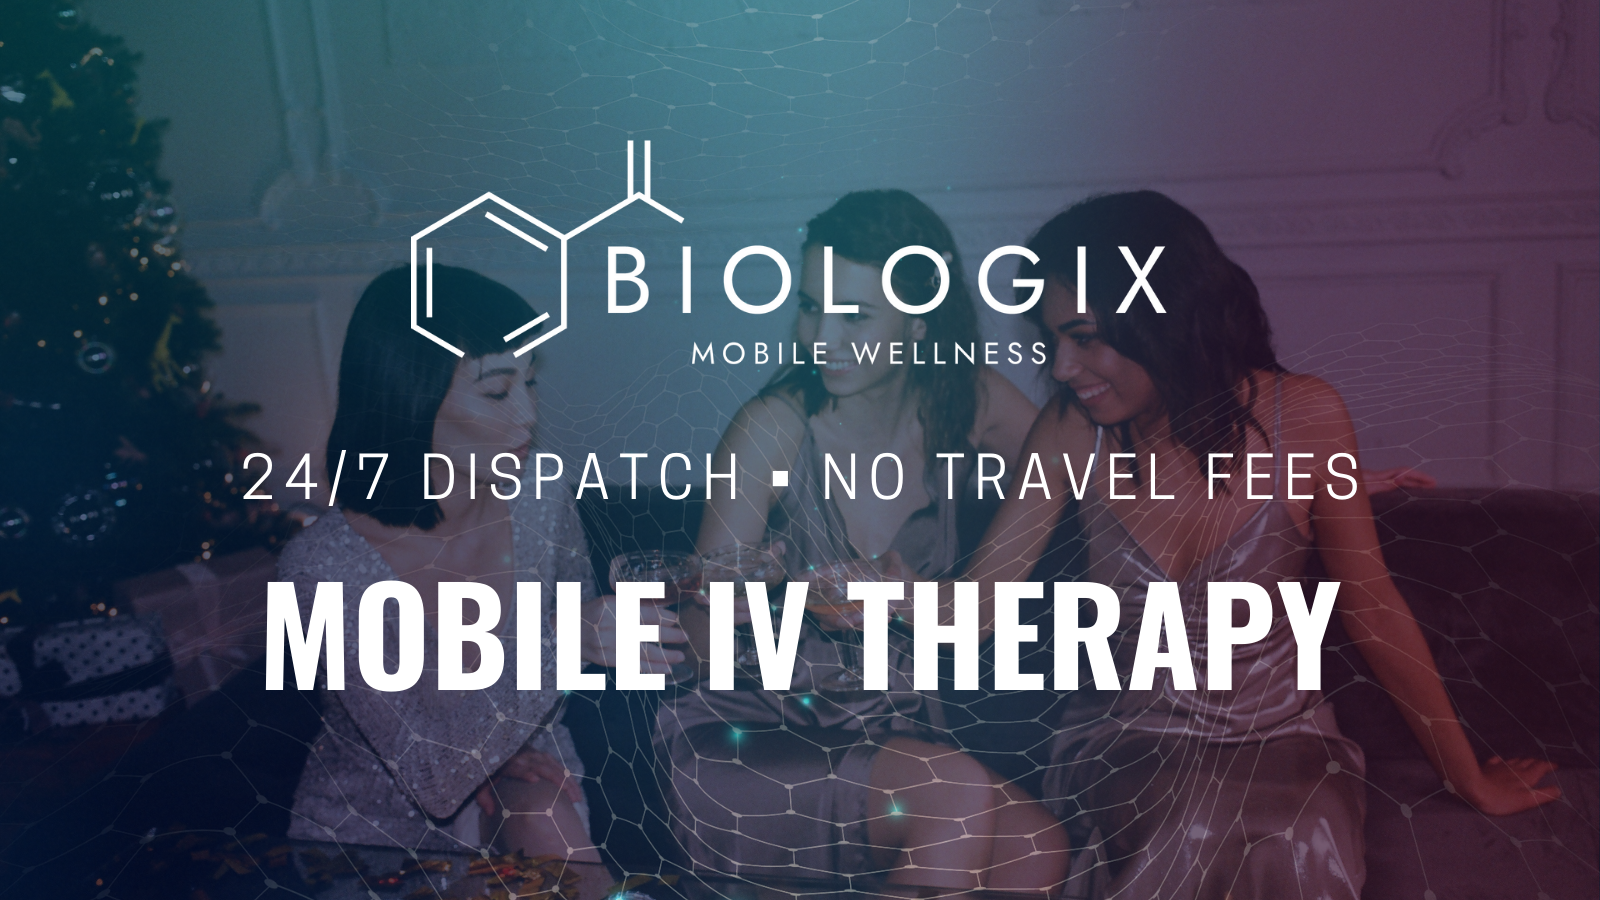 Mobile IV Therapy - Biologix Mobile Wellness - Photo (94189)